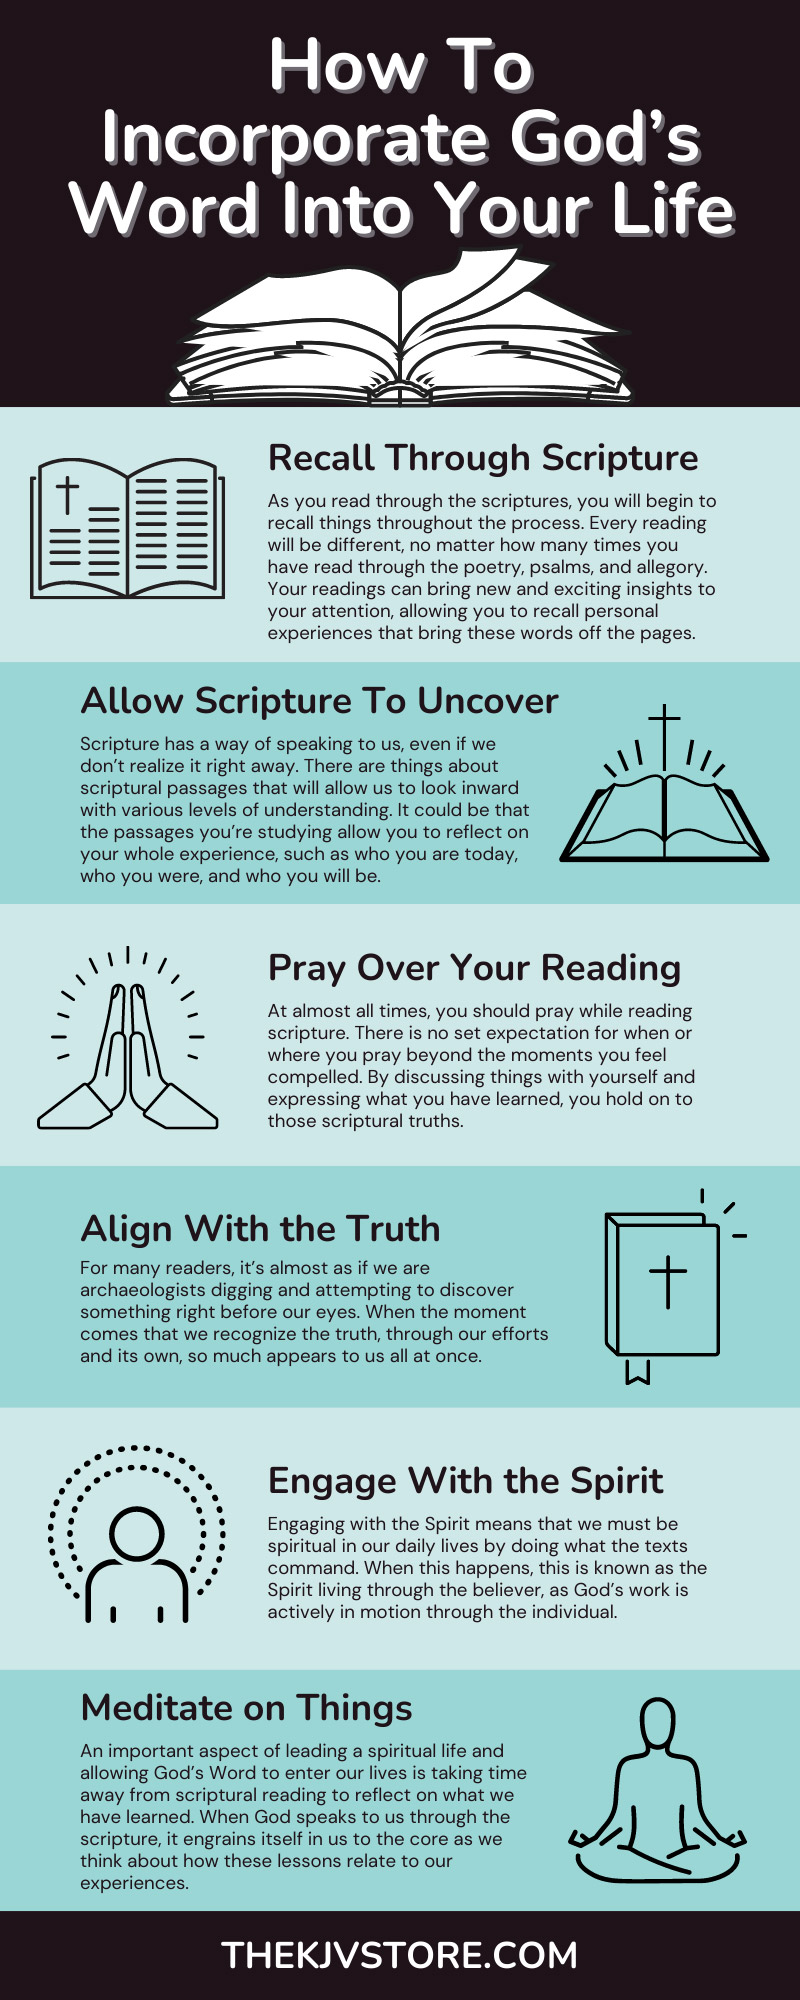 How To Incorporate God’s Word Into Your Life